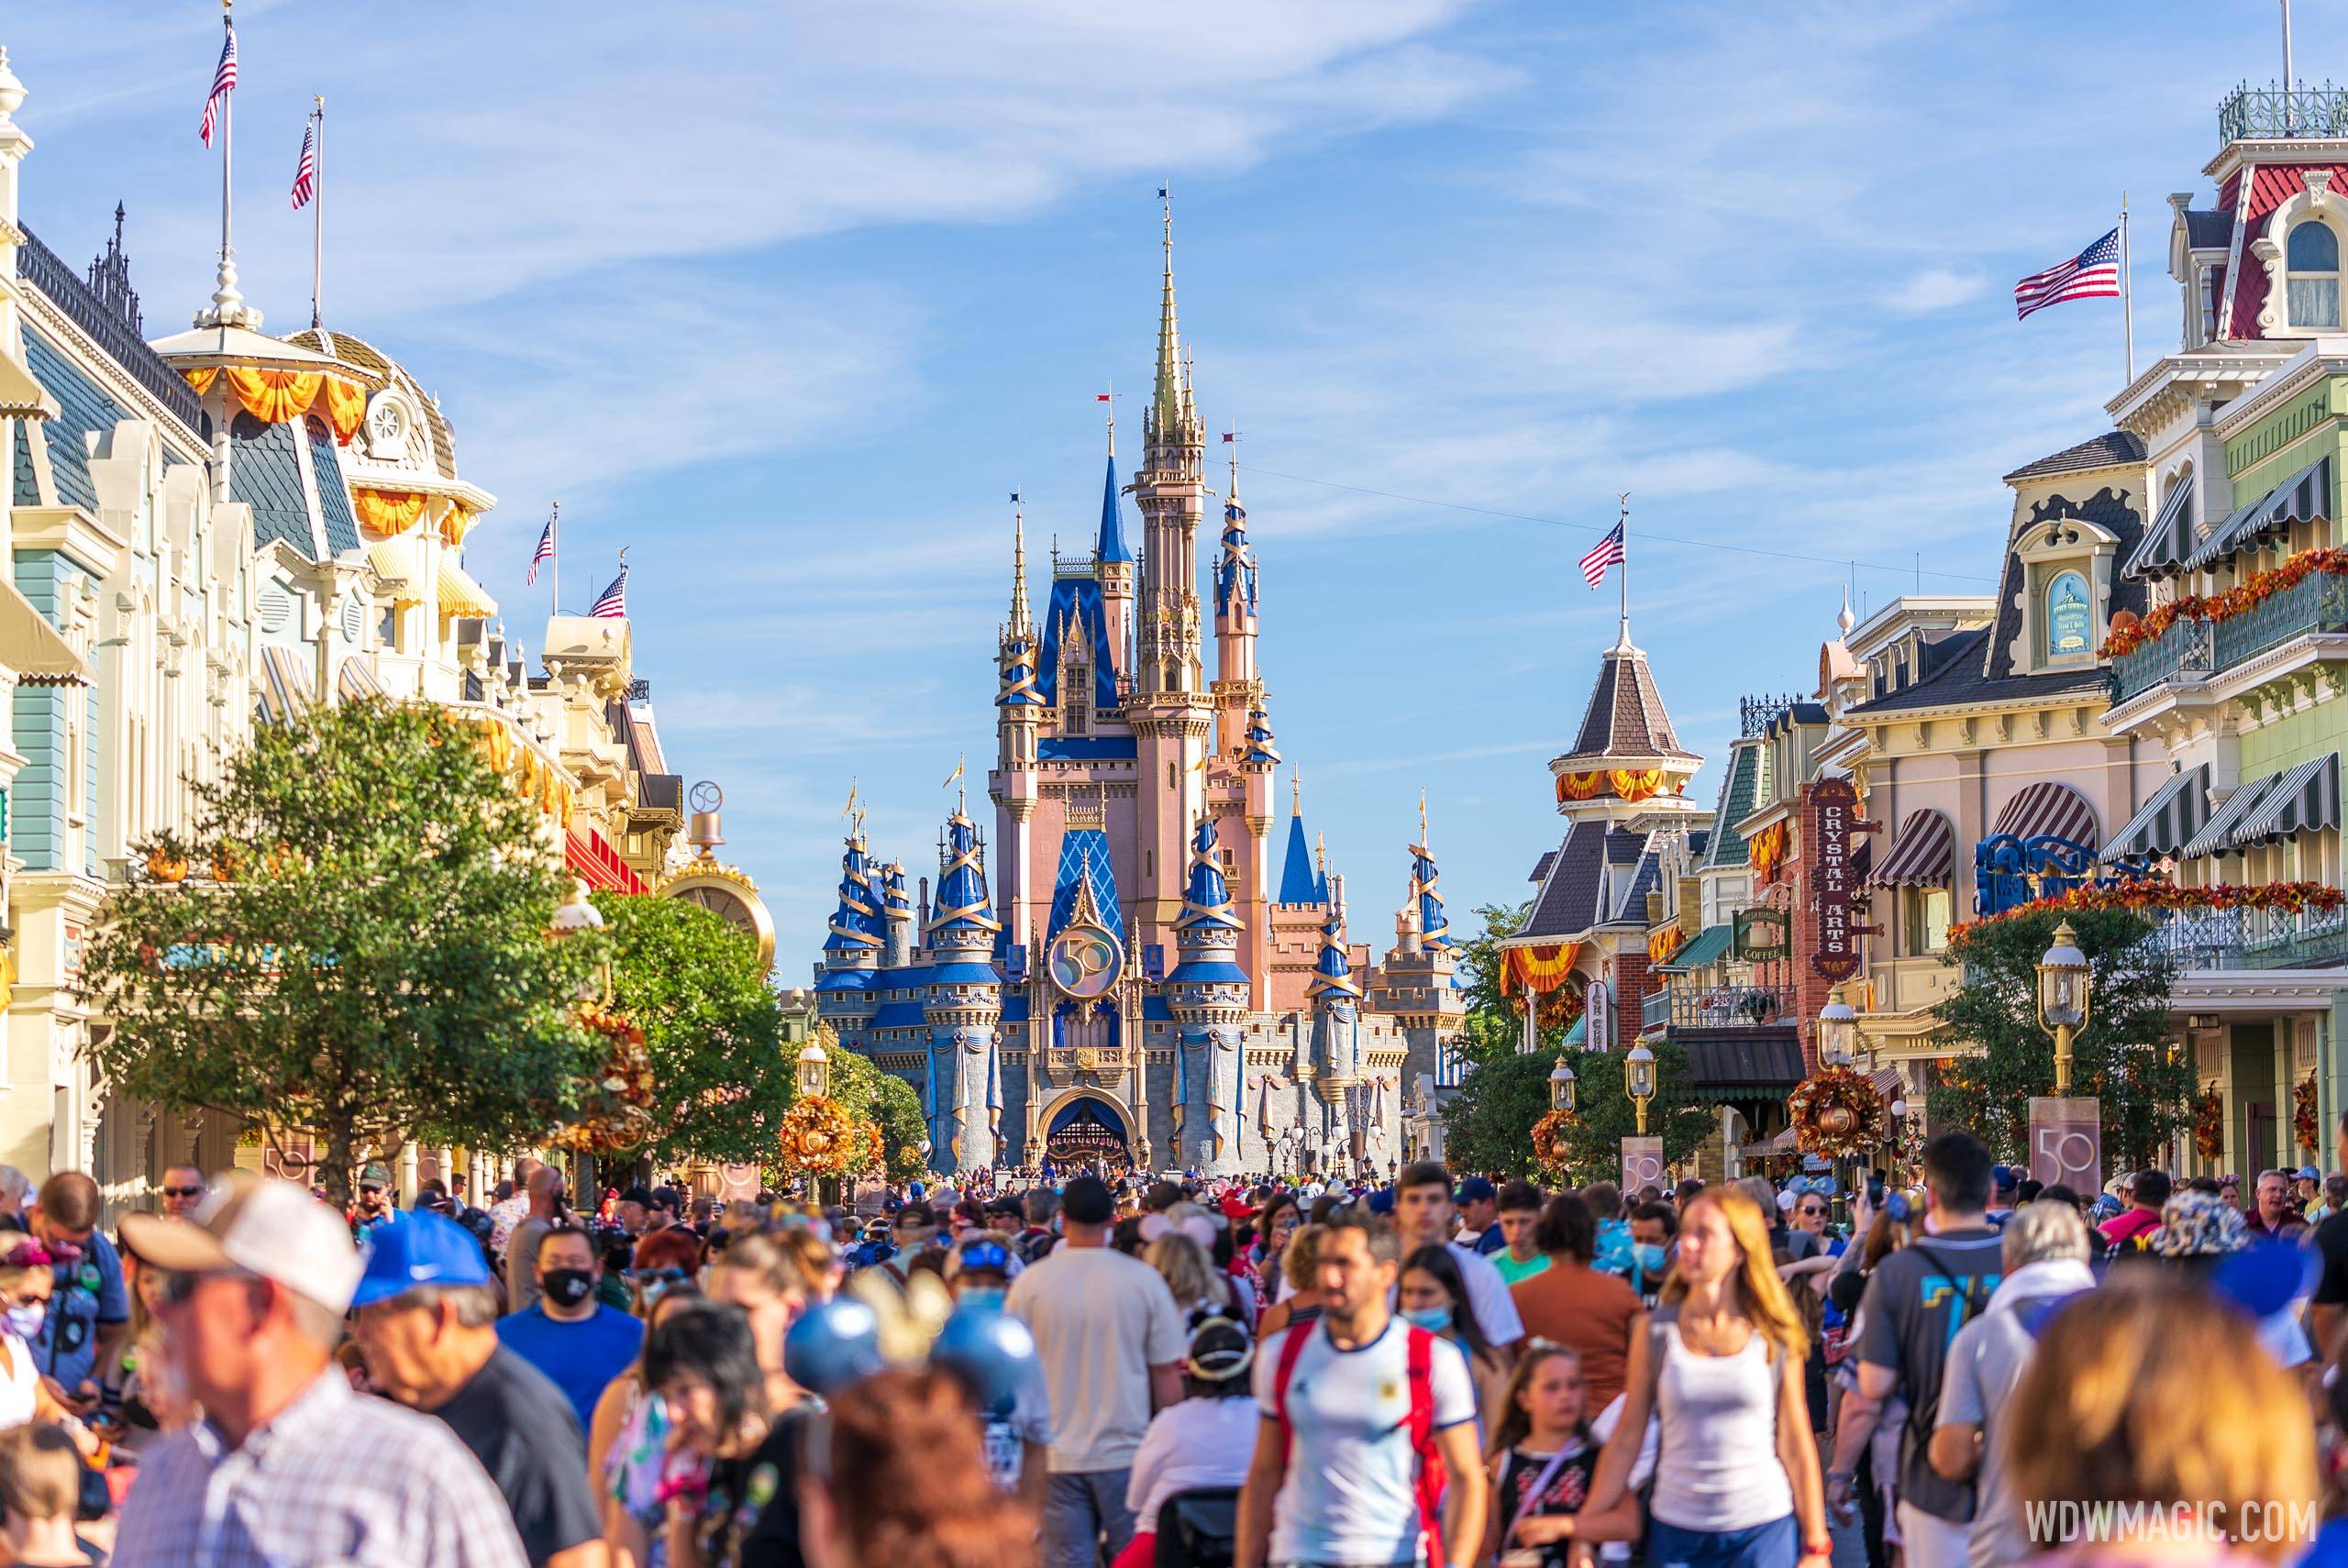 Walt Disney World Cast Members have experienced a difficult two years as the park's reopened from the pandemic